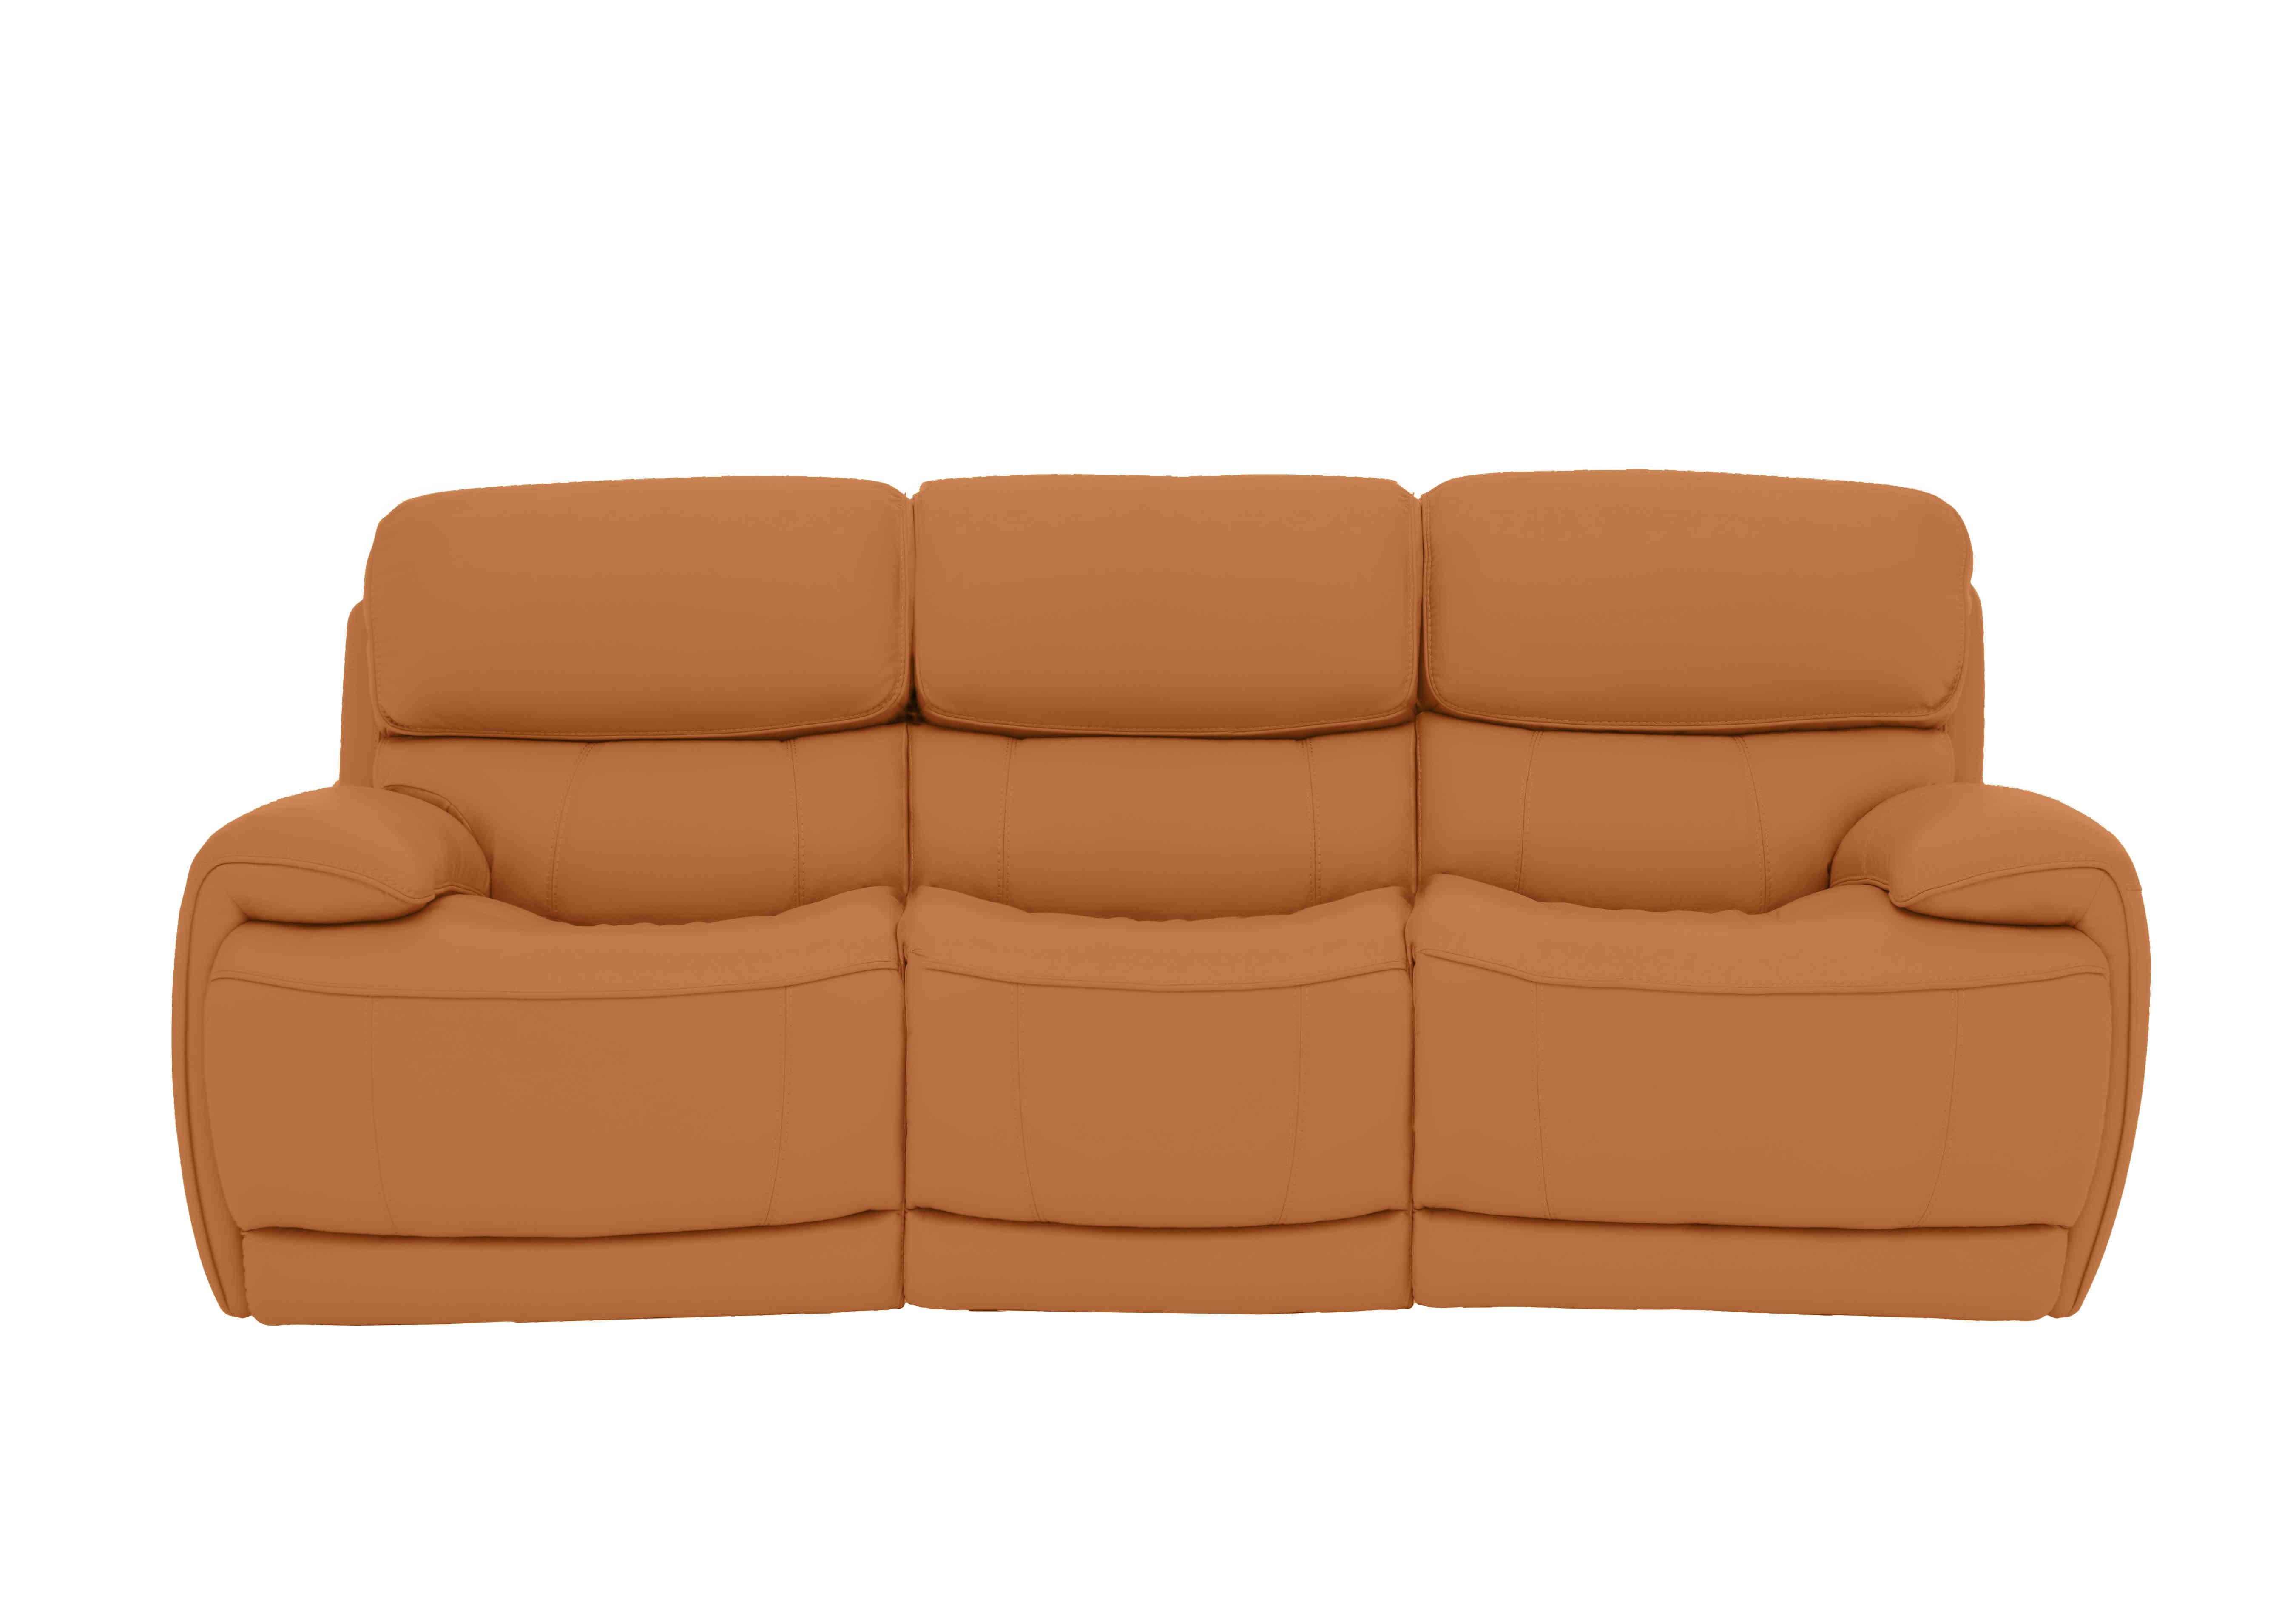 Rocco 3 Seater Leather Power Rocker Sofa with Power Headrests in Bv-335e Honey Yellow on Furniture Village